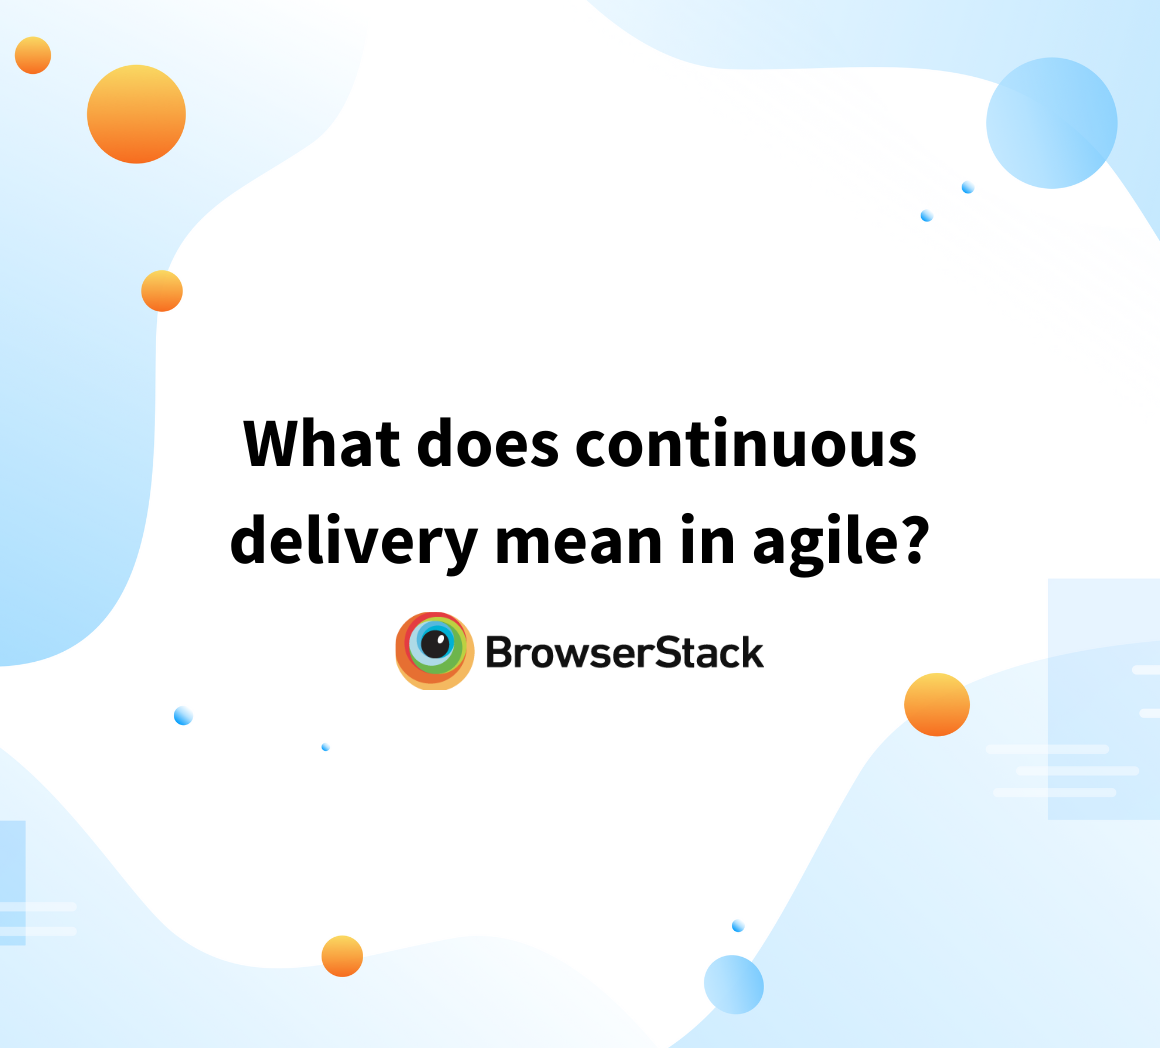 What does continuous delivery mean in agile